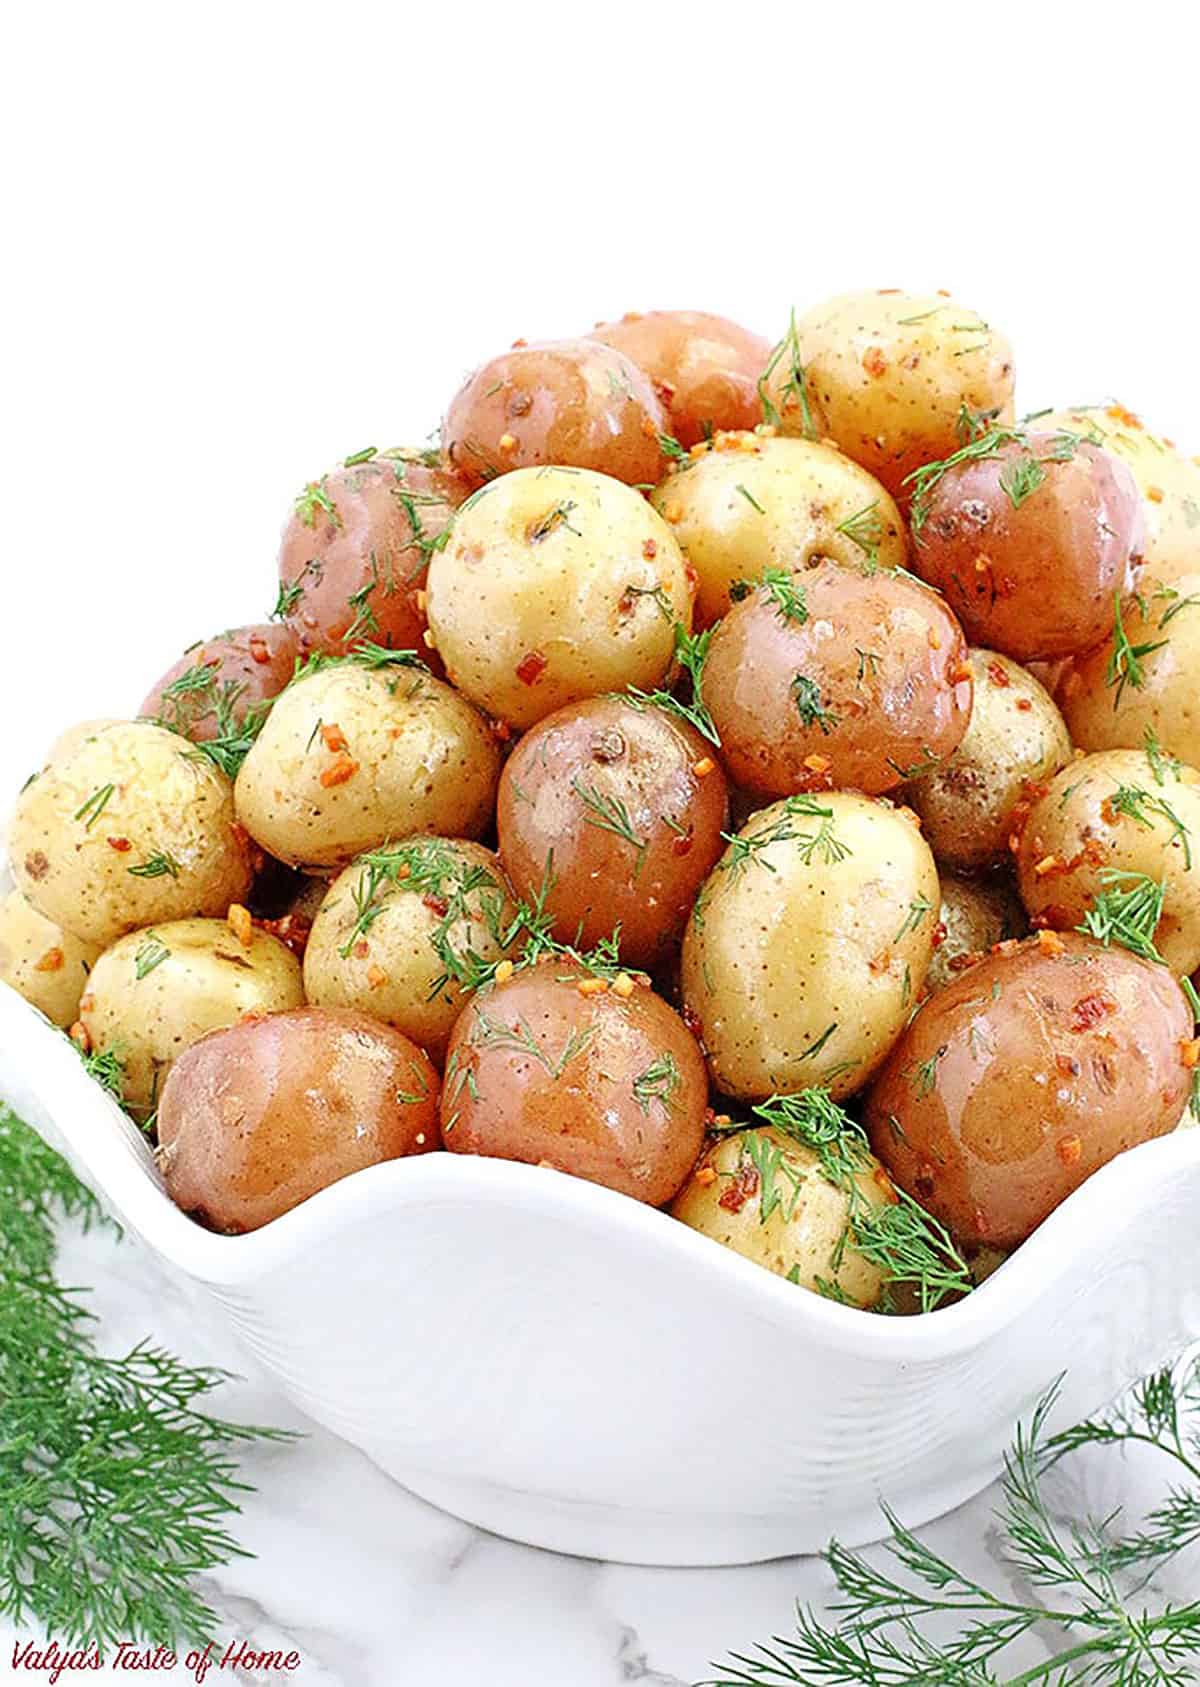 Oven Roasted Baby Potatoes with Garlic Butter and Dill